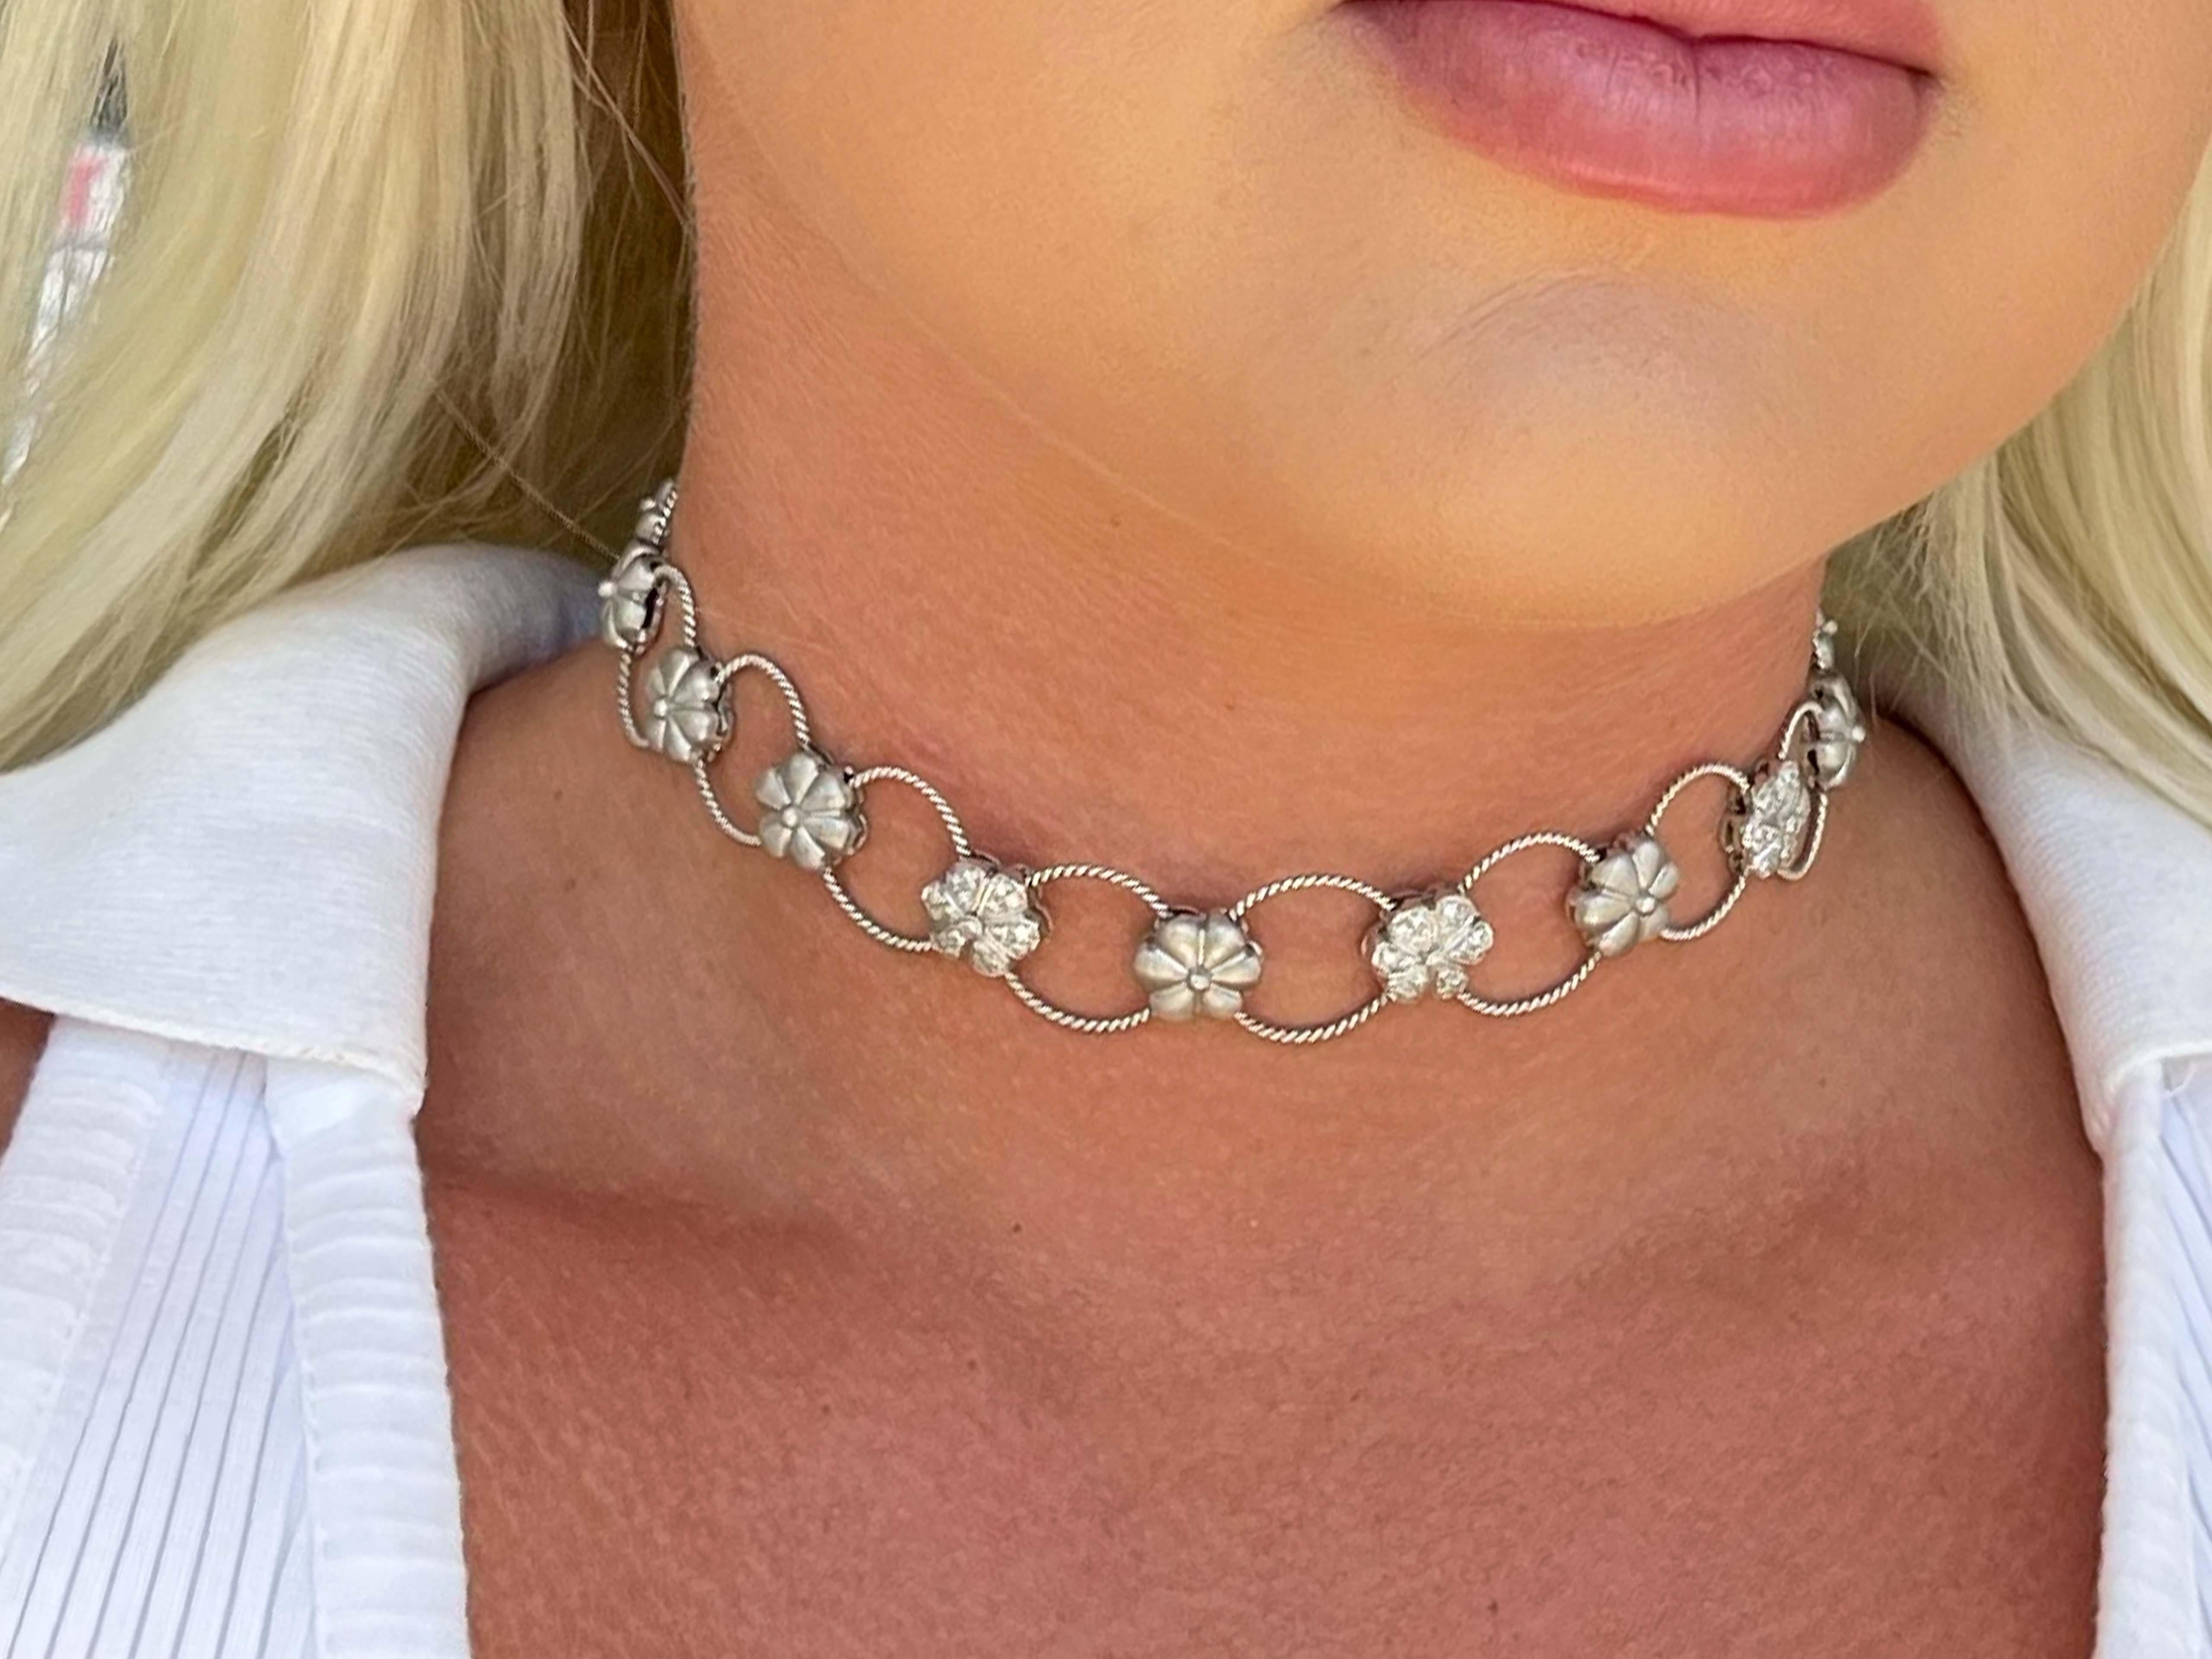 Stunning 18K white gold diamond choker necklace by Assor Gioielli. The magnificent design of this choker necklace features 14 cable design hoops connected together by 13 sand-blasted flower design sections with three sections pave' set with